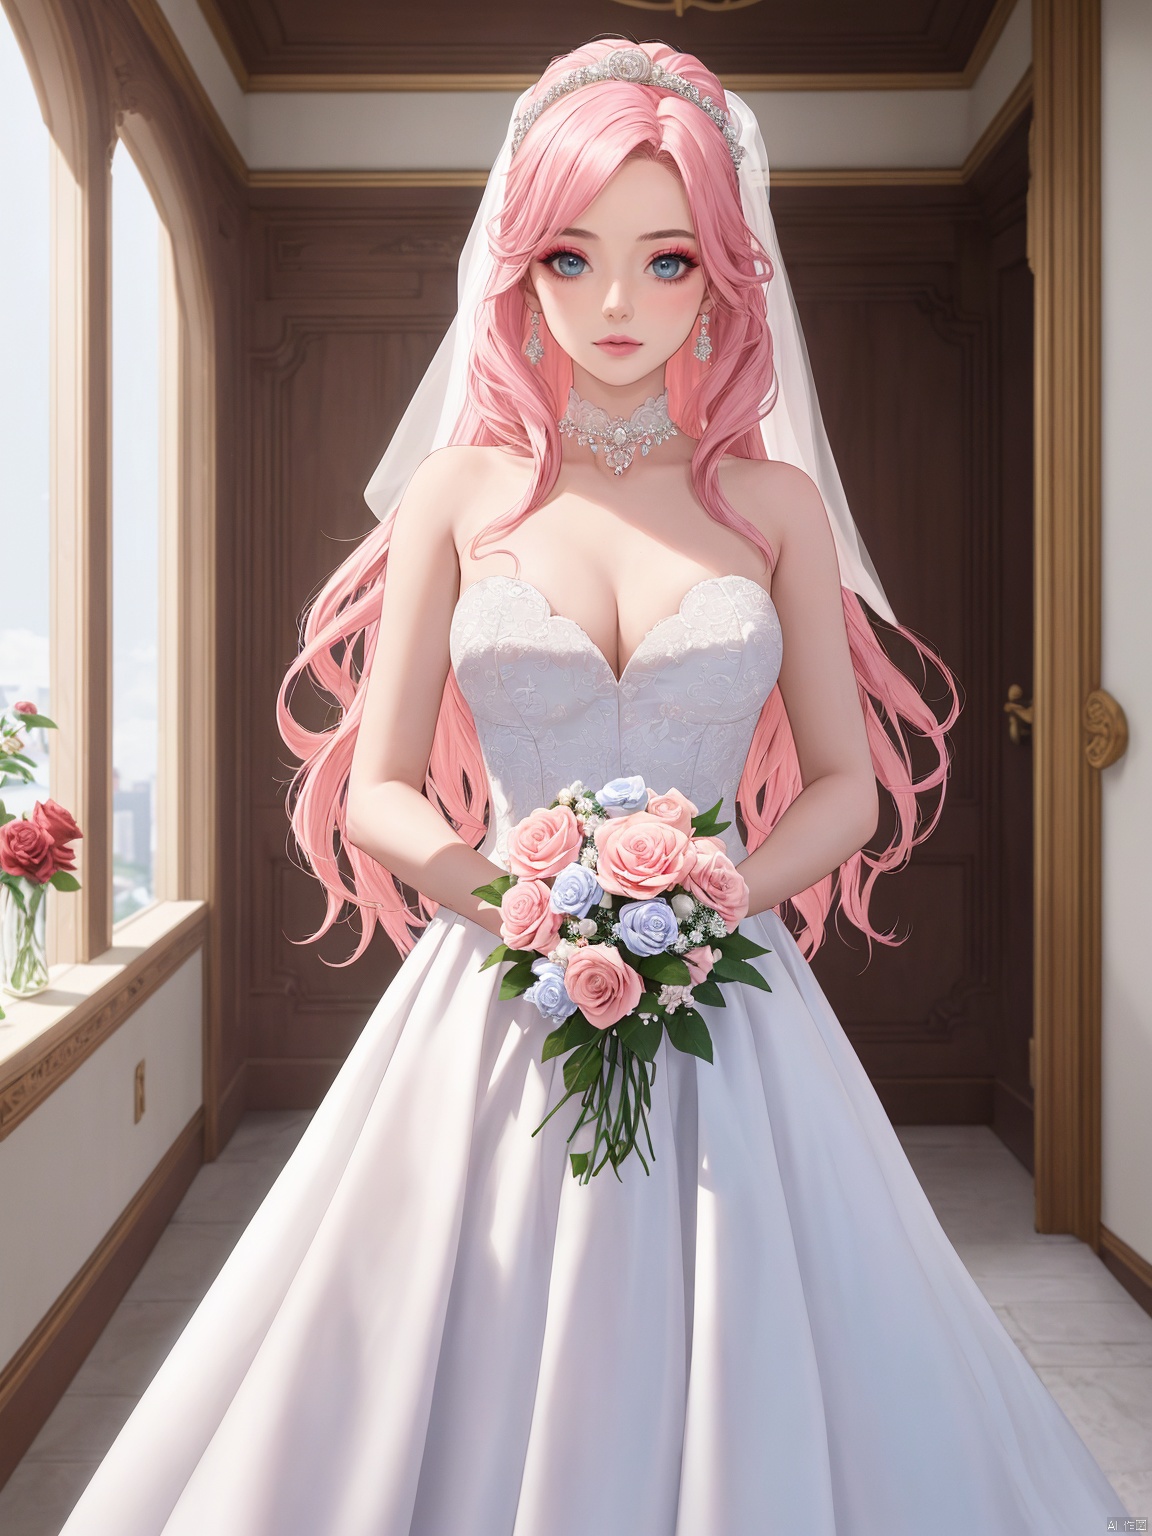  masterpiece,1 girl,22 years old,Look at me,Exquisite makeup,Pink hair.,Long hair,white wedding dress,Wipe the chest,Indoor,Exquisite decoration,Bright light,Stand,In the middle of the picture,Whole body,Plenty of roses,textured skin,super detail,best quality,Future City,FilmGirl,blue and white porcelain,